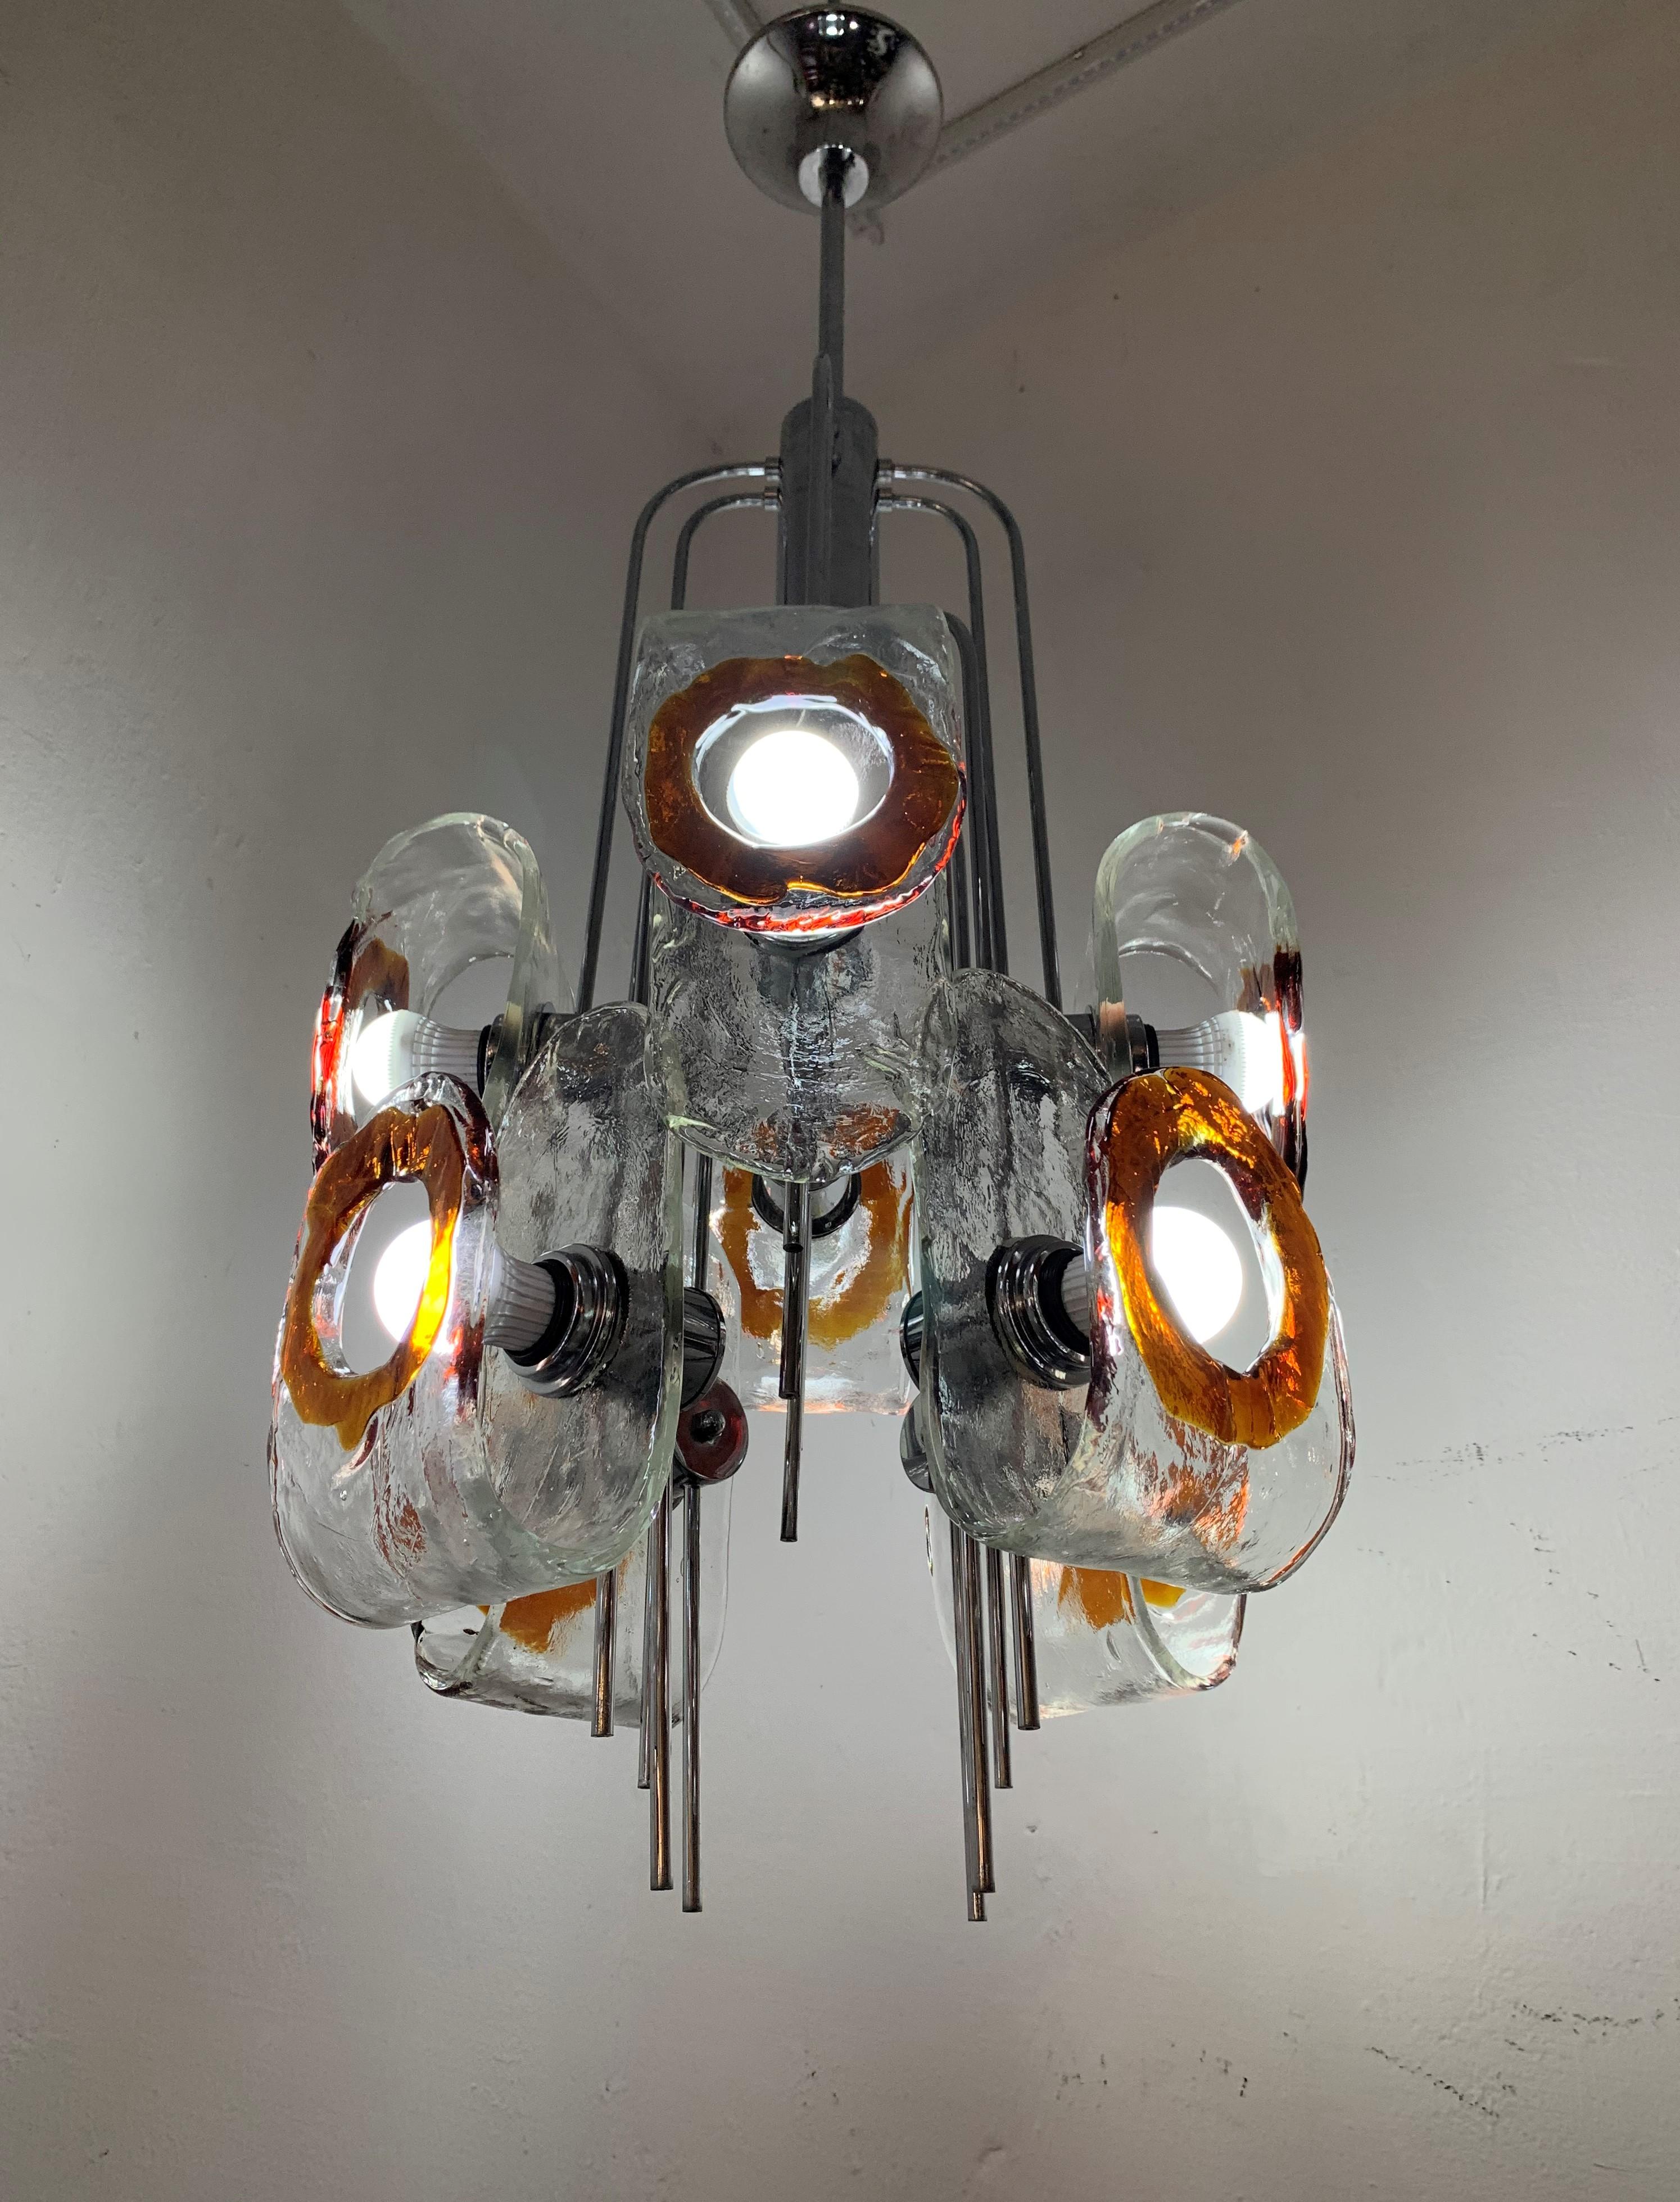 20th Century Large Mid-Century Modern Chandelier by Mazzega, Murano Glass, Italy circa 1970 For Sale